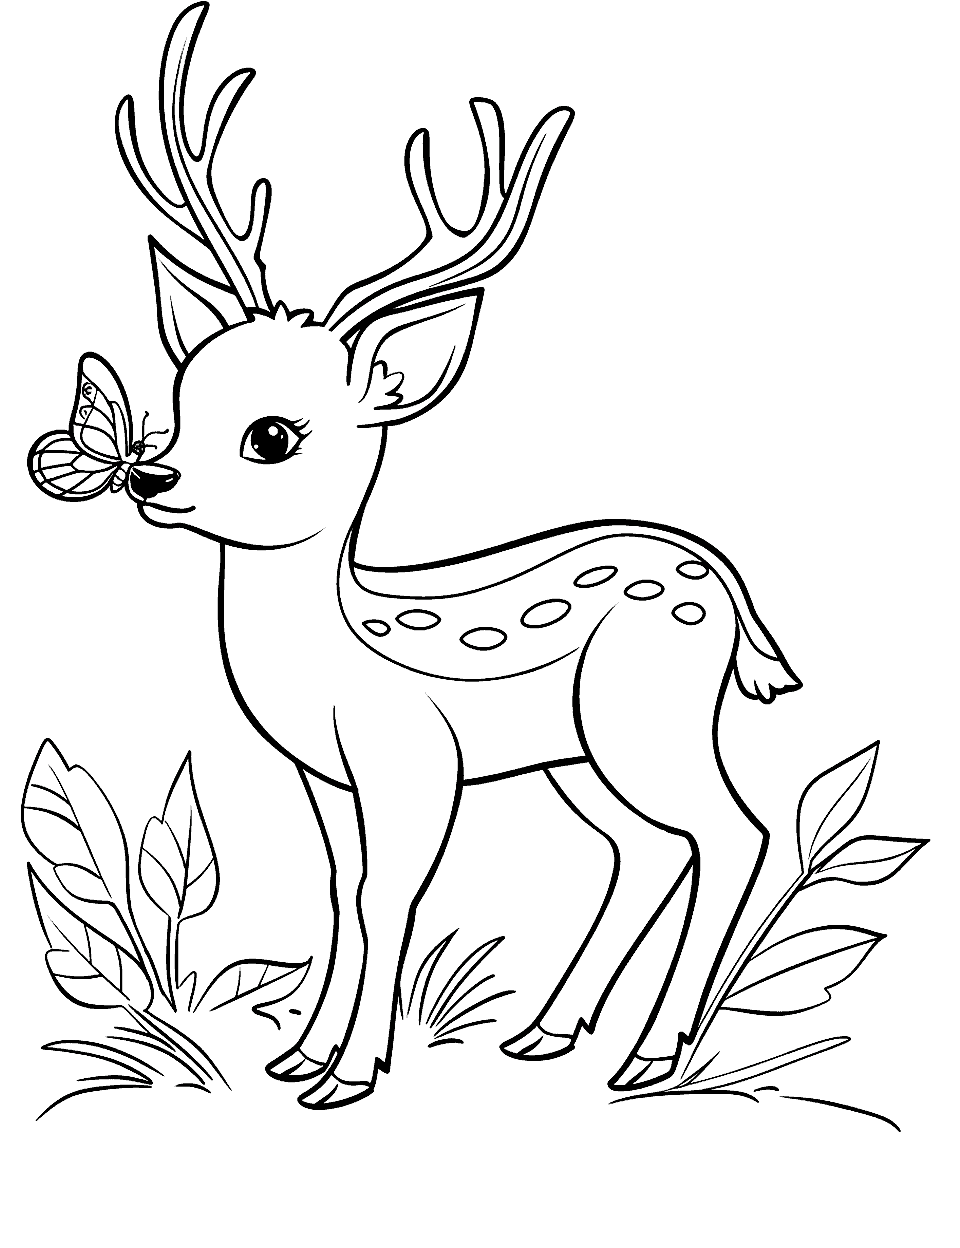 Baby Deer with Butterfly on Nose Coloring Page - A cute baby deer with a butterfly perched on its nose.